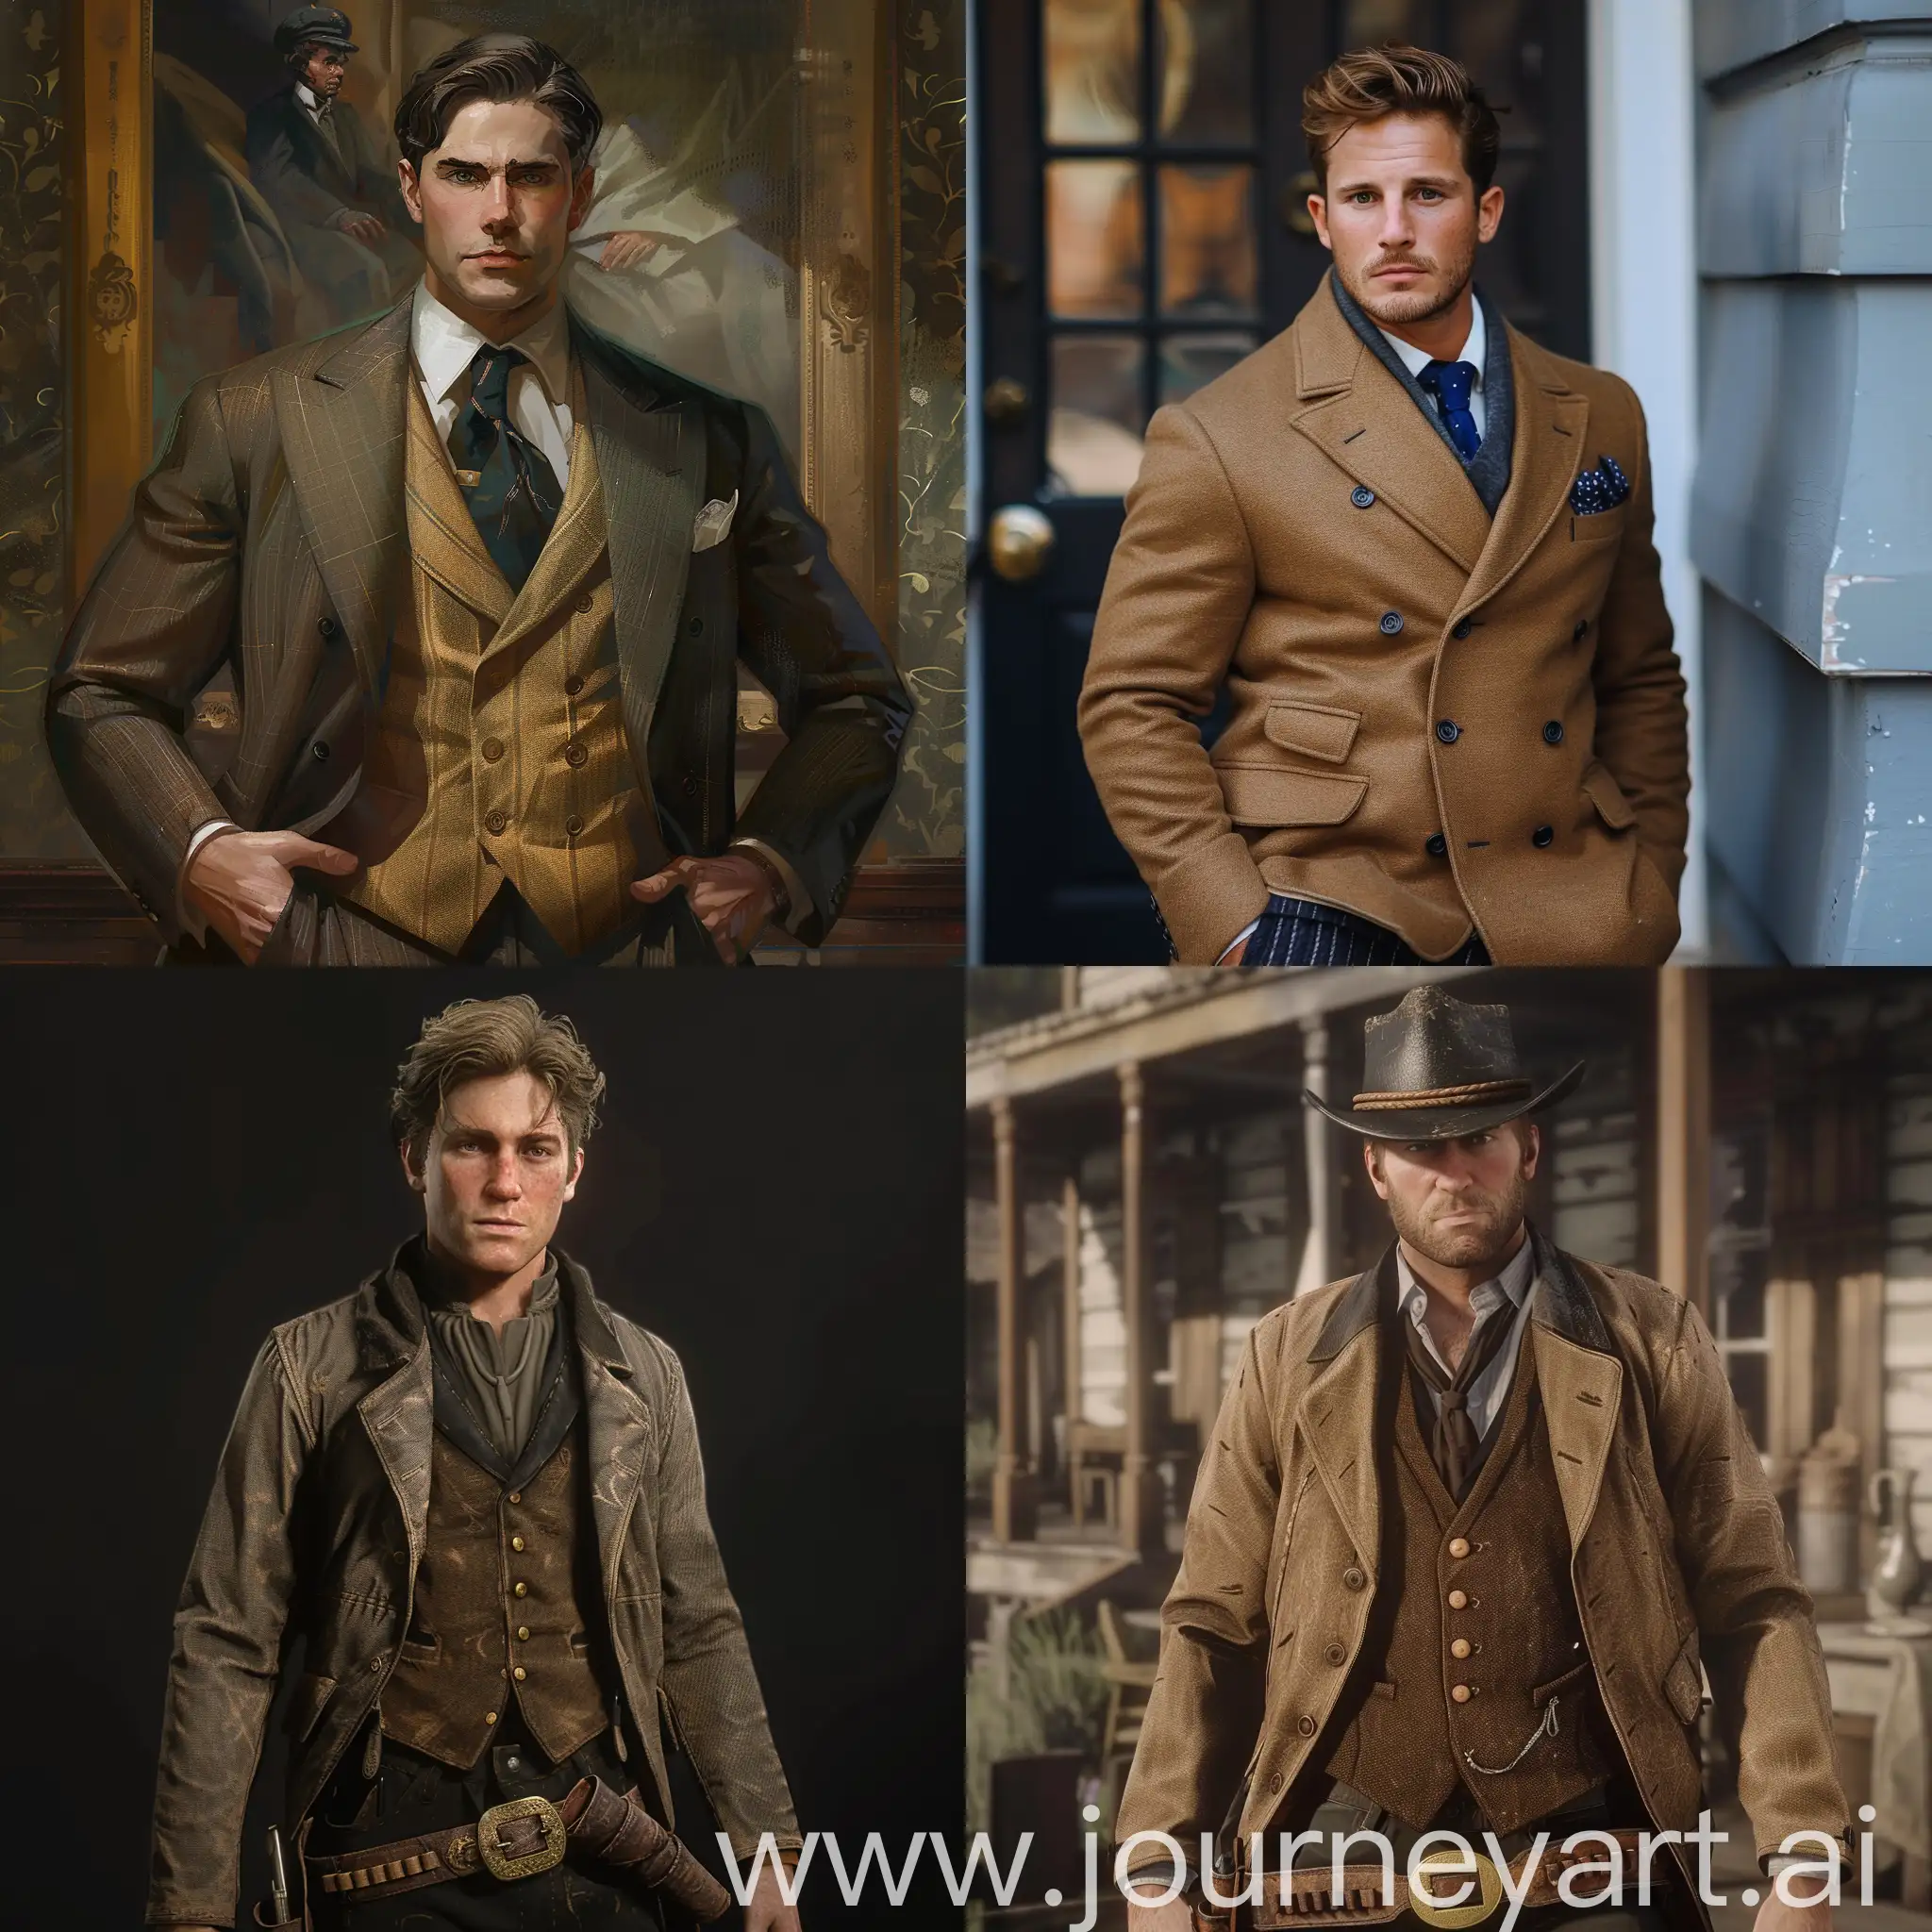 Stylish-James-in-Handsome-Outfit-with-Vintage-Vibe